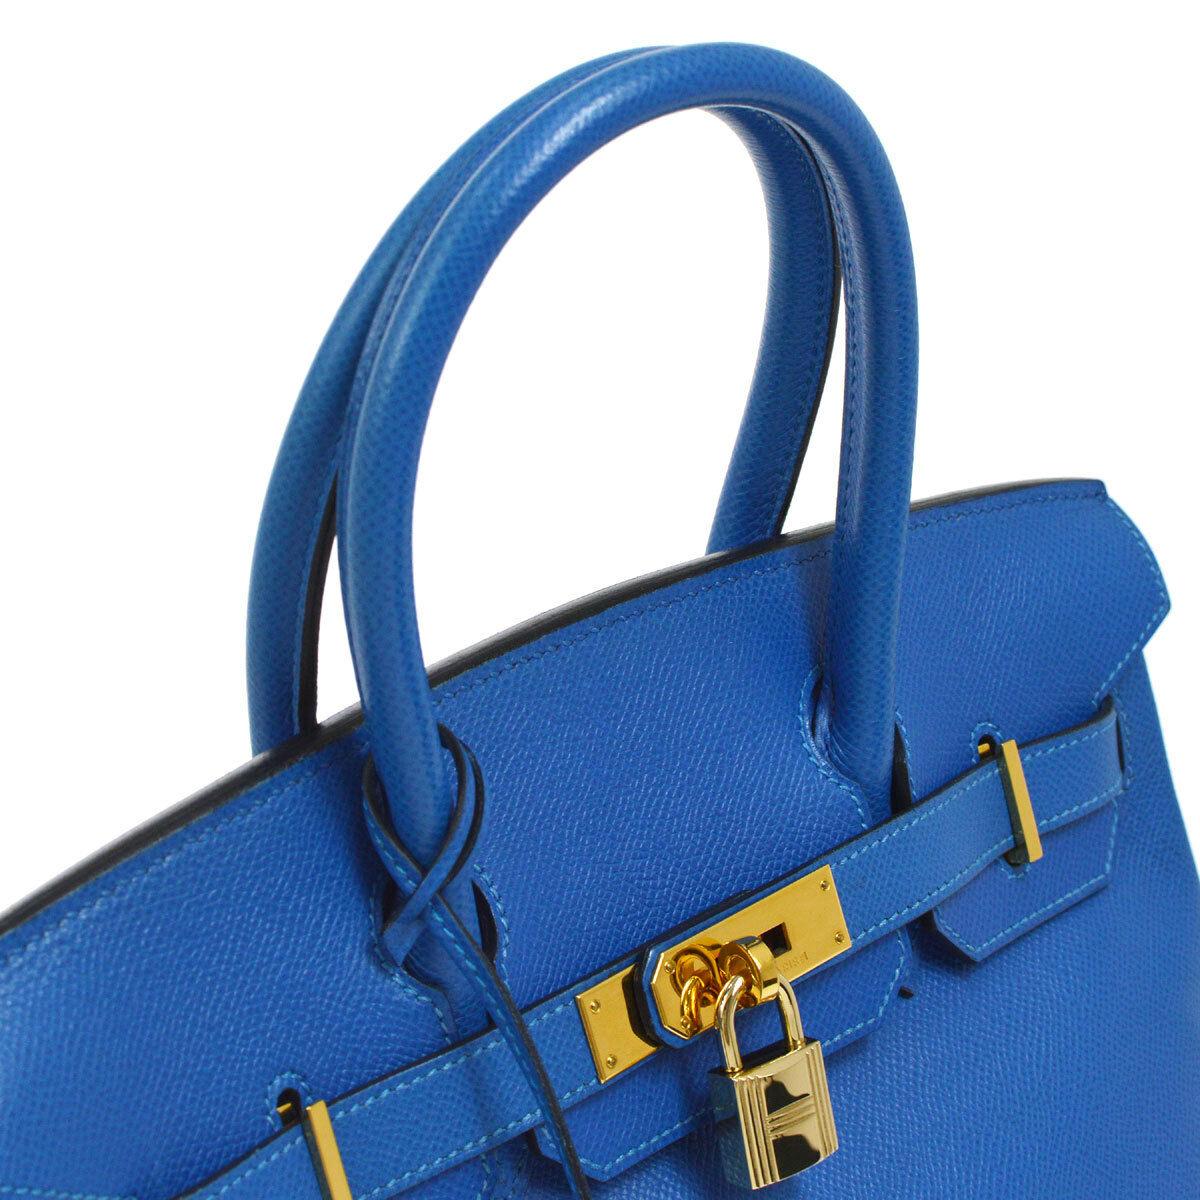 Hermes Birkin 30 Aqua Blue Leather Gold Top Handle Satchel Tote Bag

Leather
Gold tone hardware
Leather lining
Date code present
Made in France
Handle drop 3.5